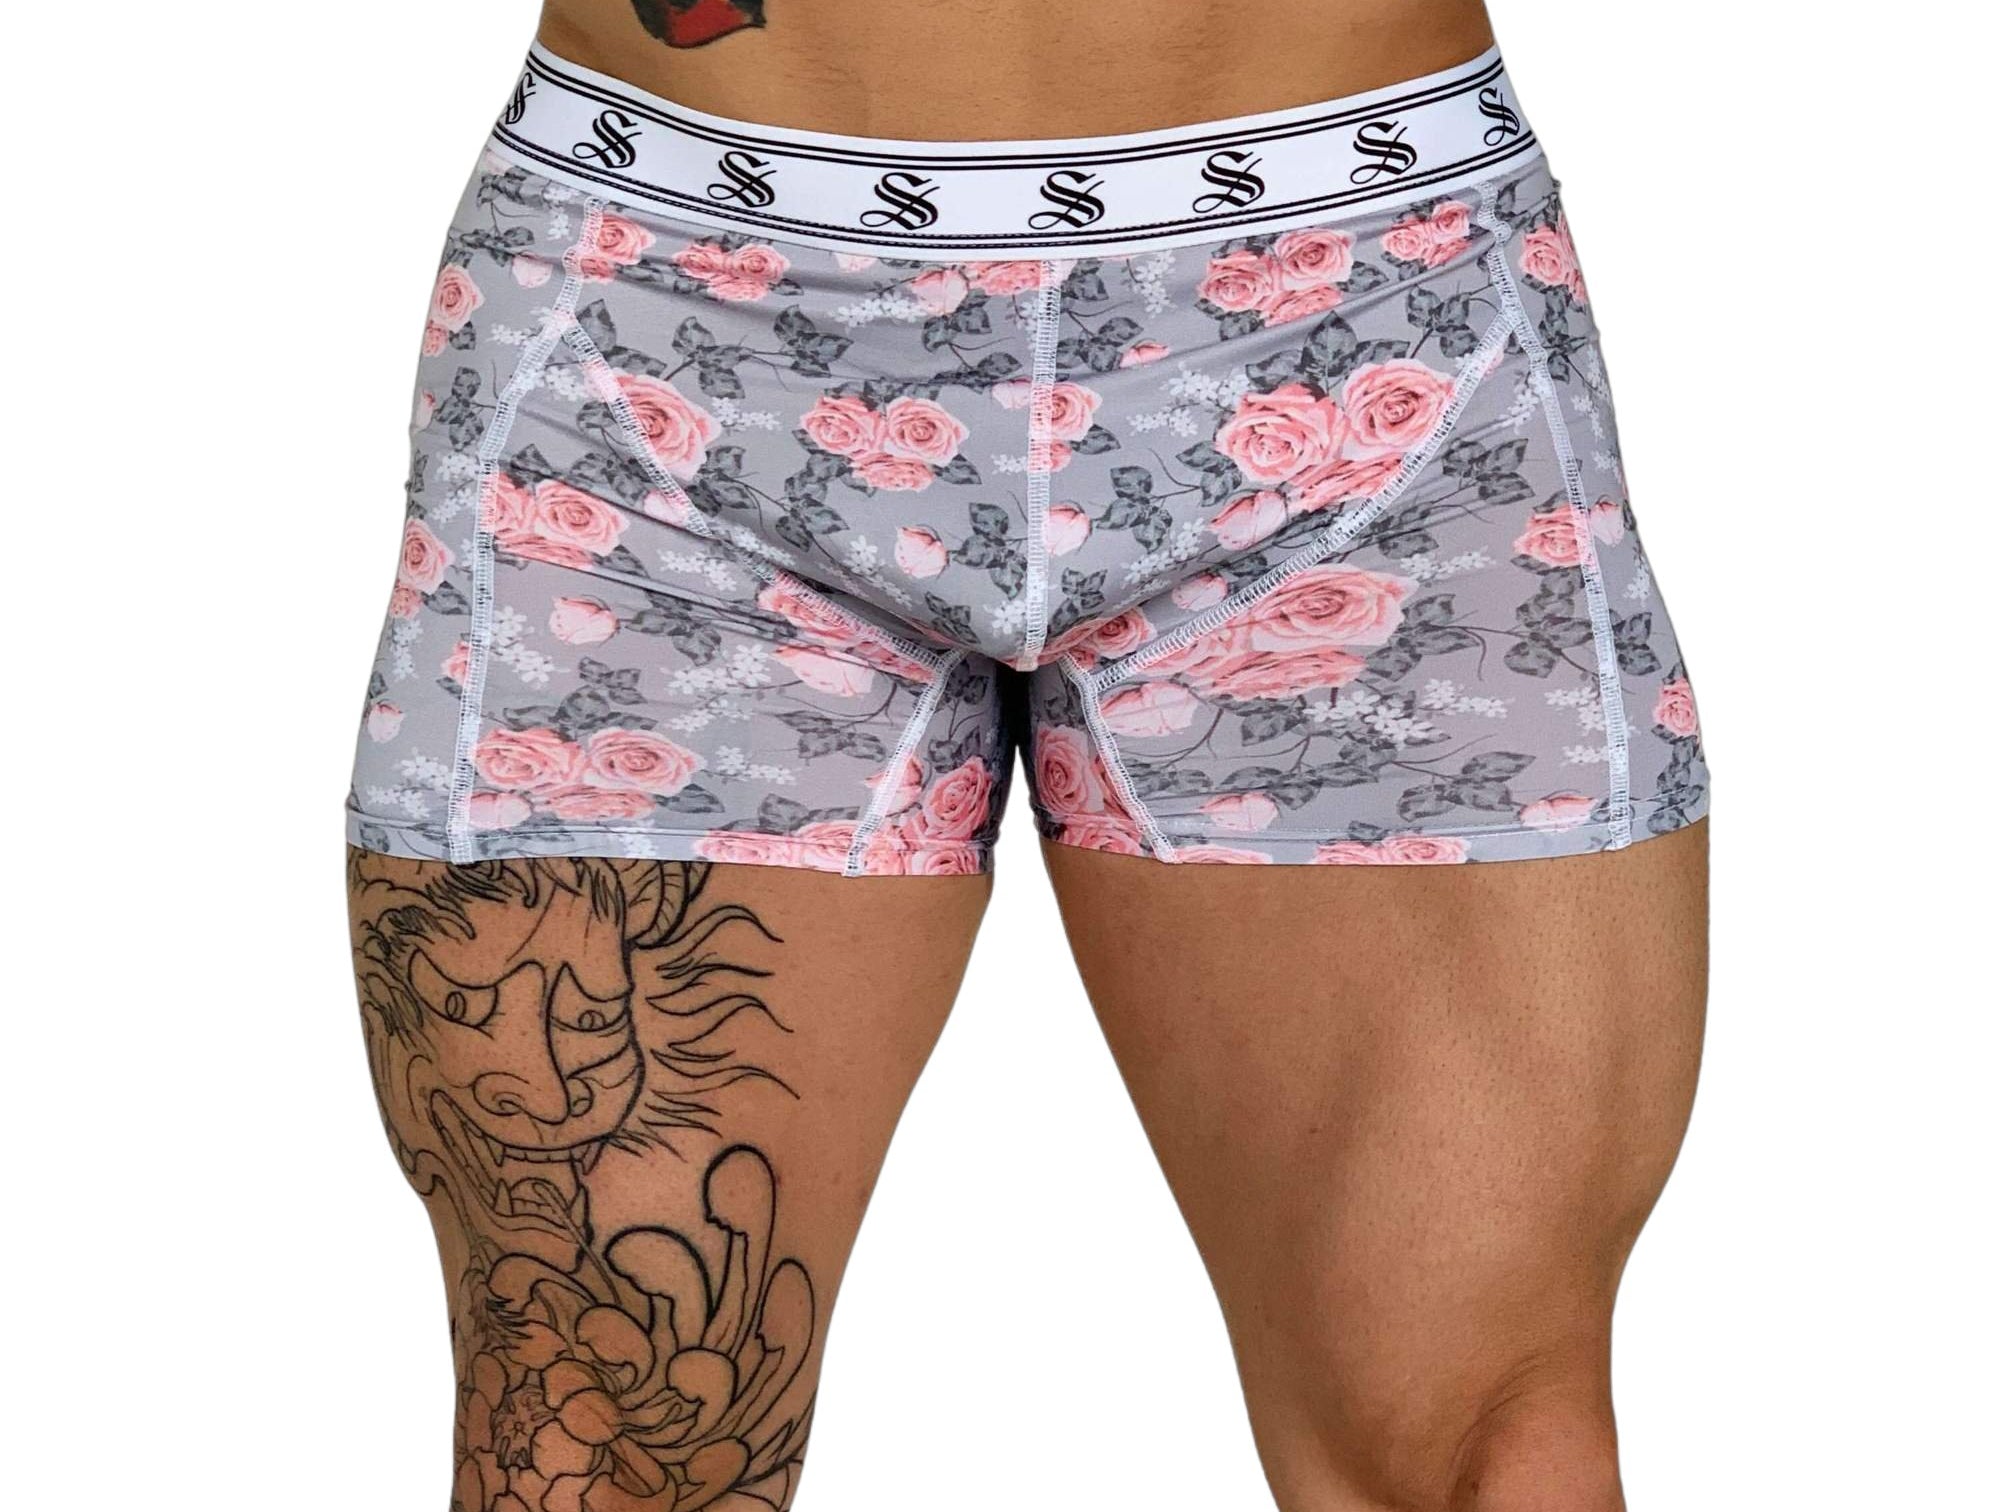 Finishing Touch - Grey/Flower Underwear for Men - Sarman Fashion - Wholesale Clothing Fashion Brand for Men from Canada